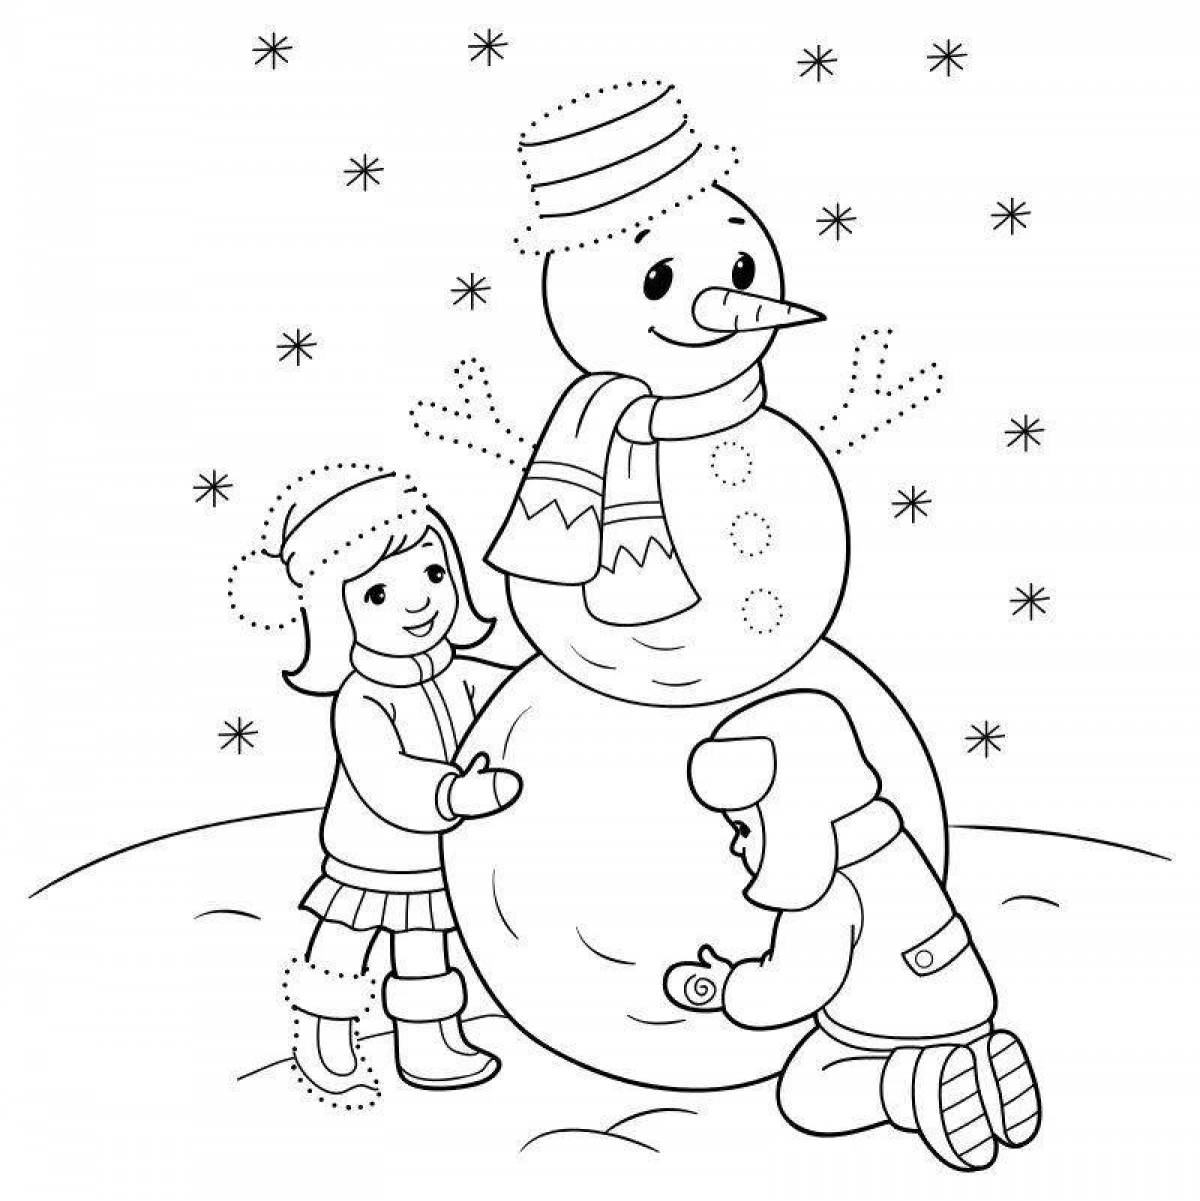 Exciting Christmas coloring games